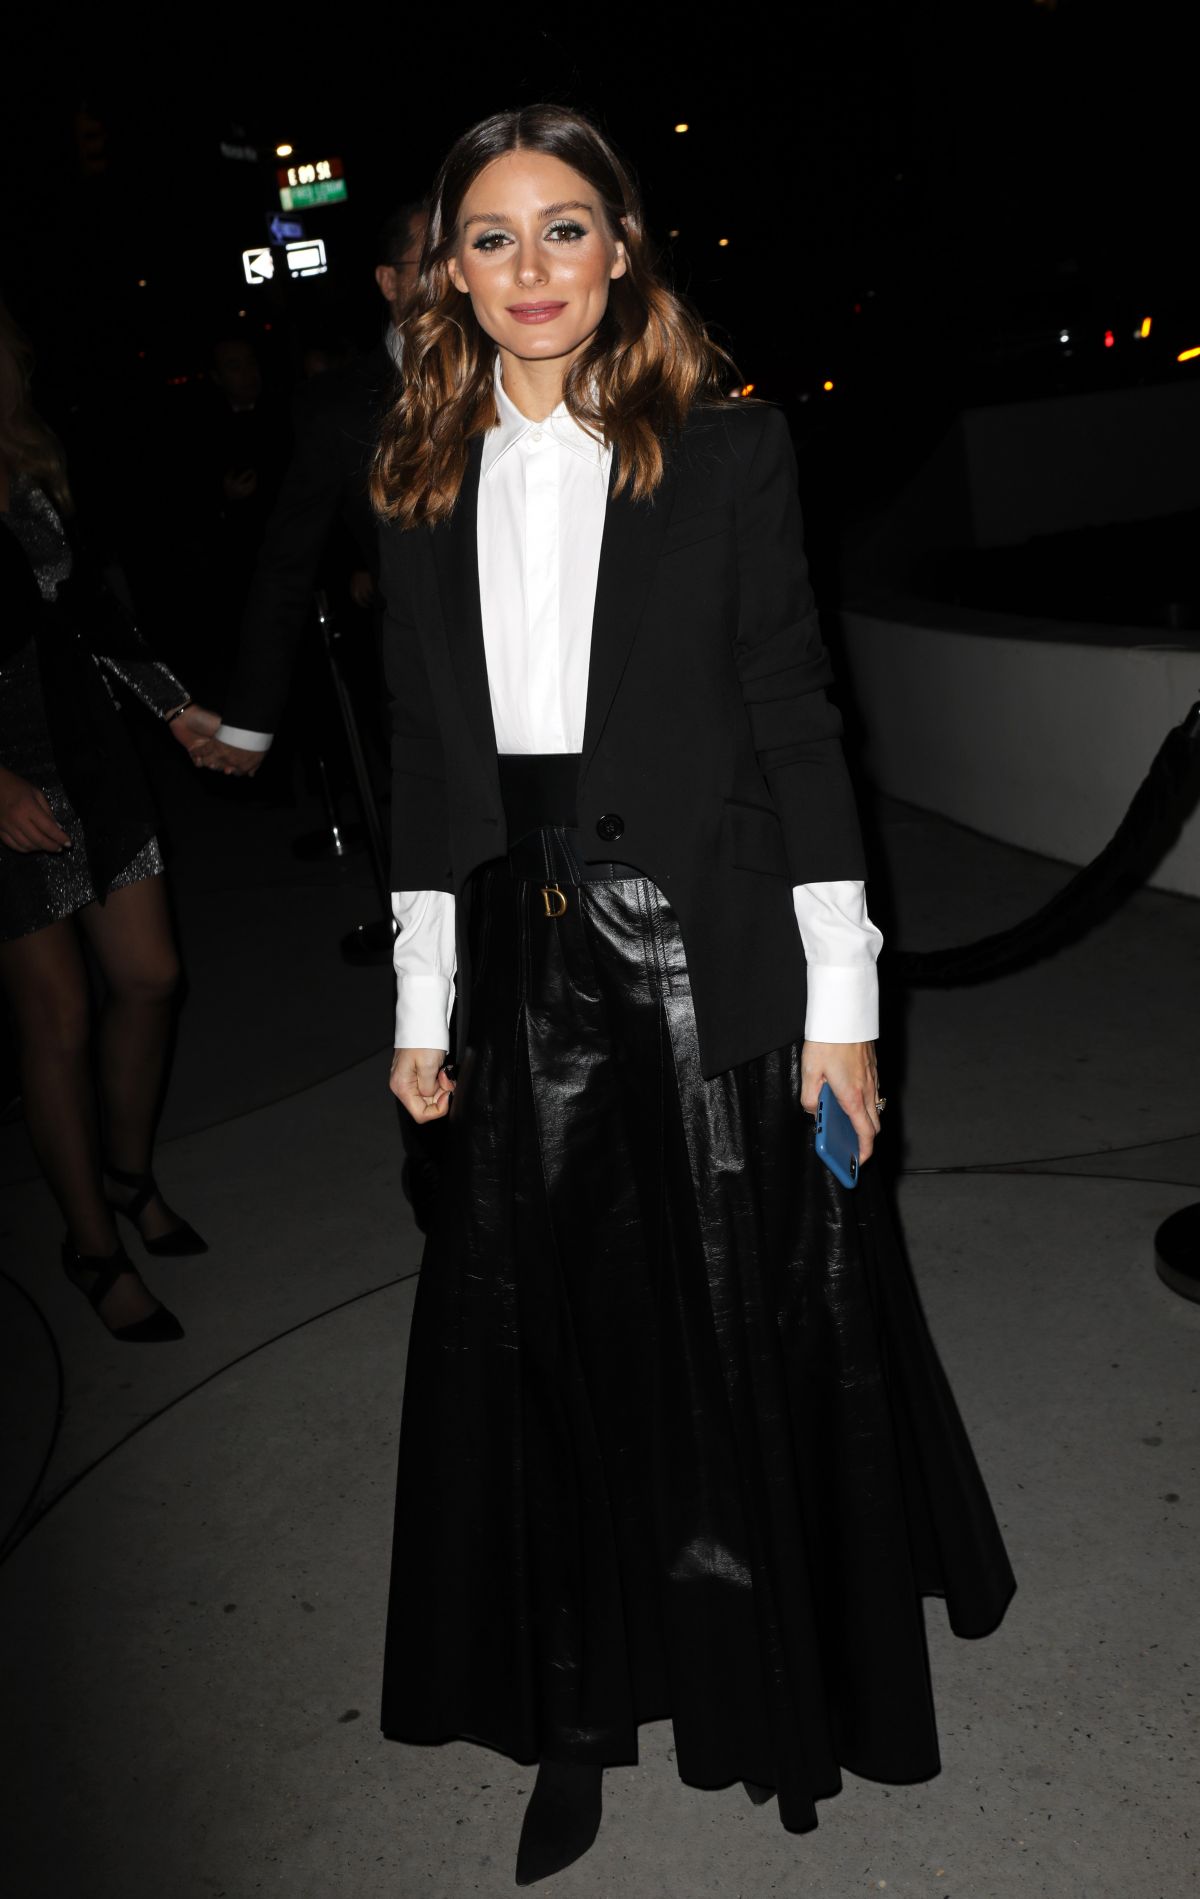 OLIVIA PALERMO at Guggenheim International Gala Pre-party in New York ...